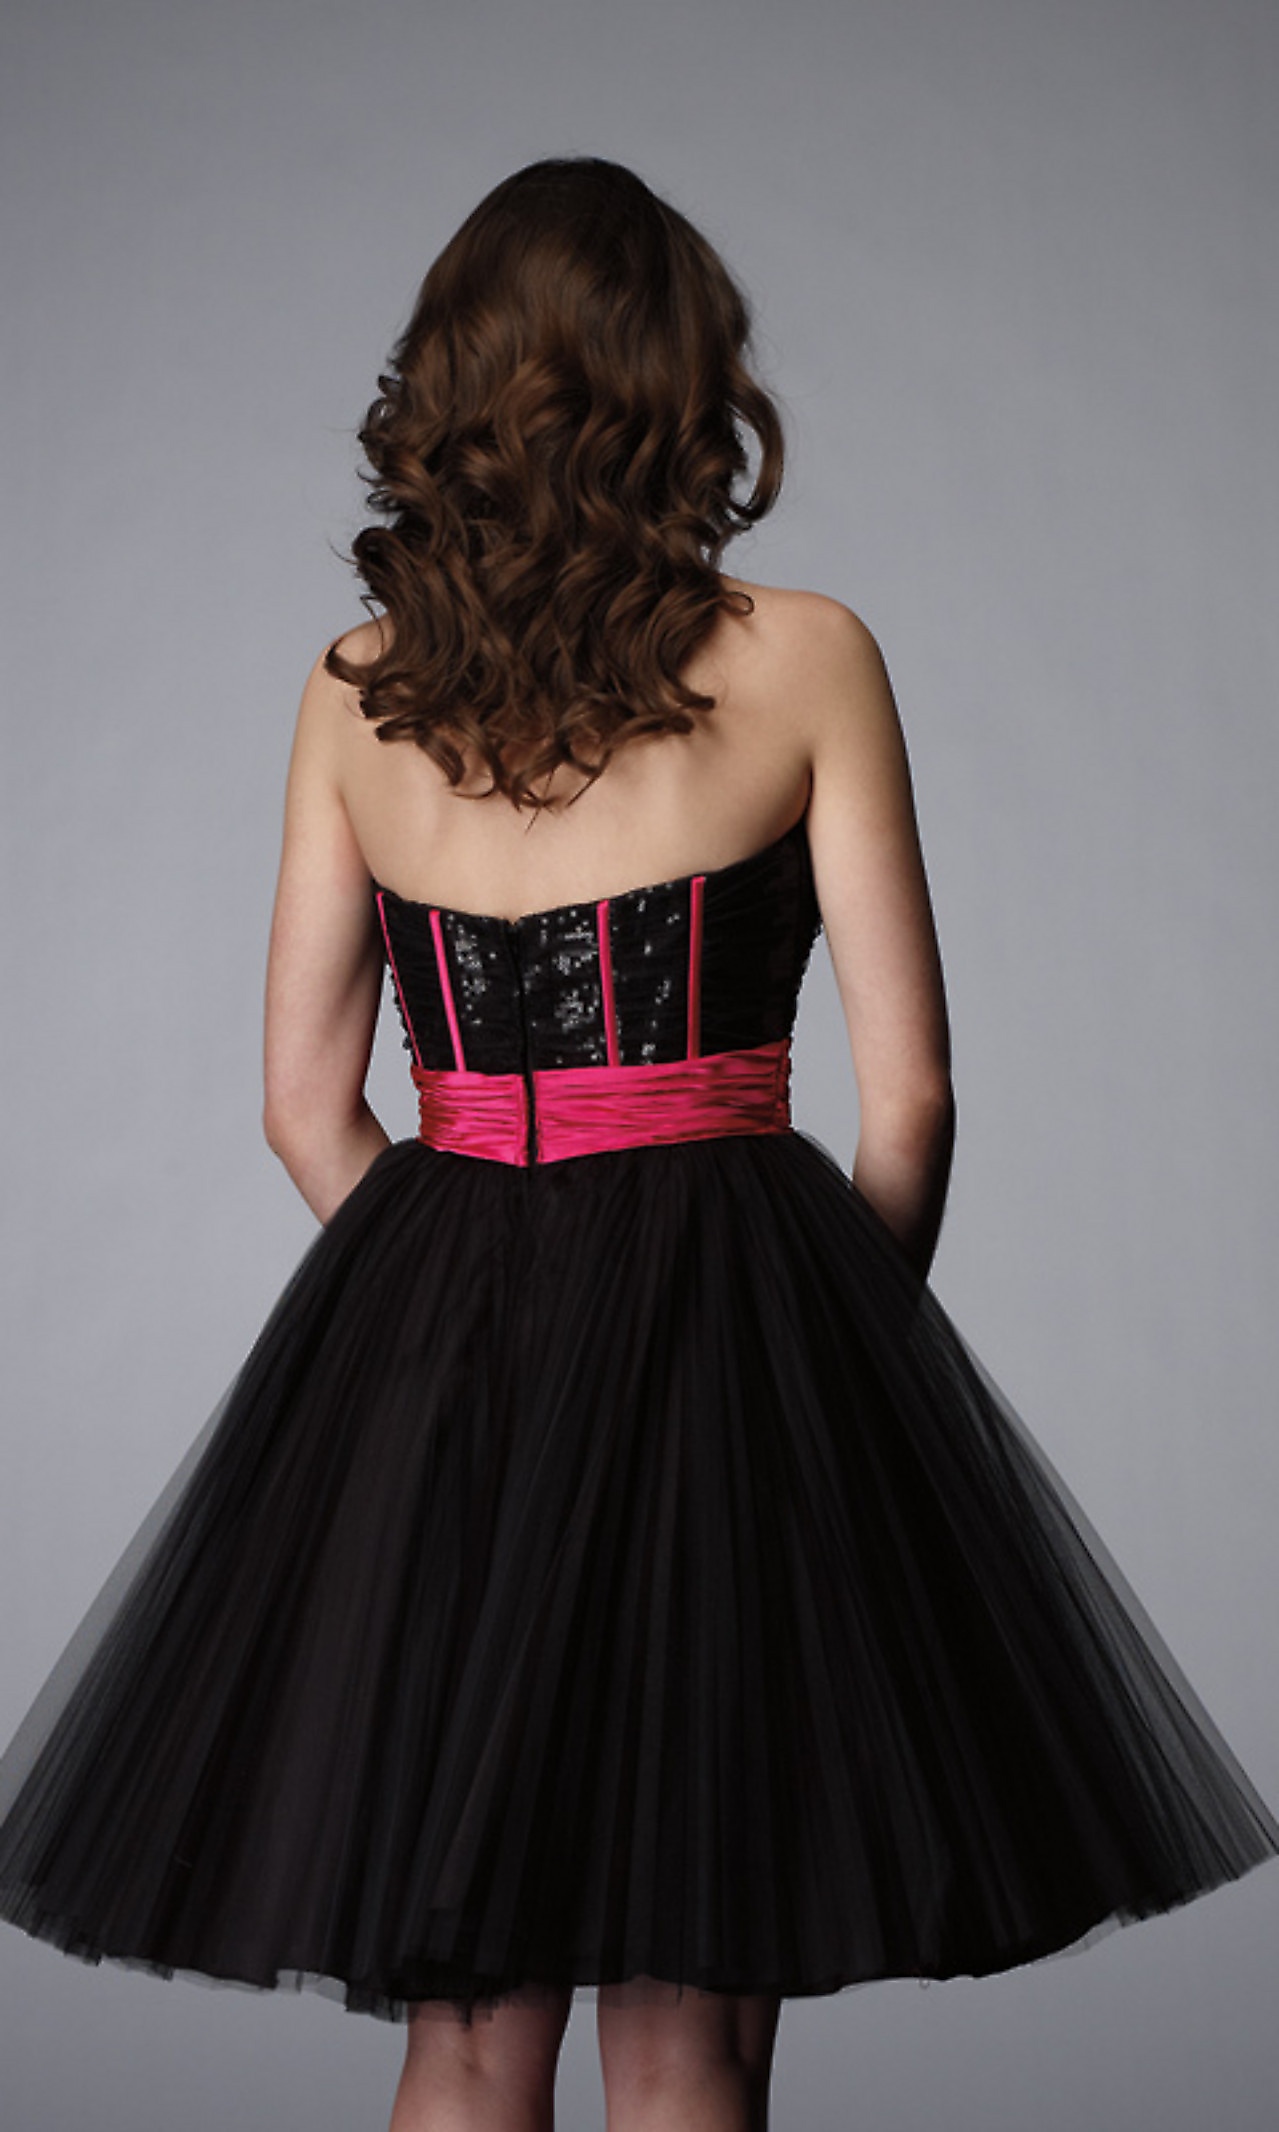 Strapless Short A-Line Black Tulle Homecoming Gown of Pink Satin Flower at Waist